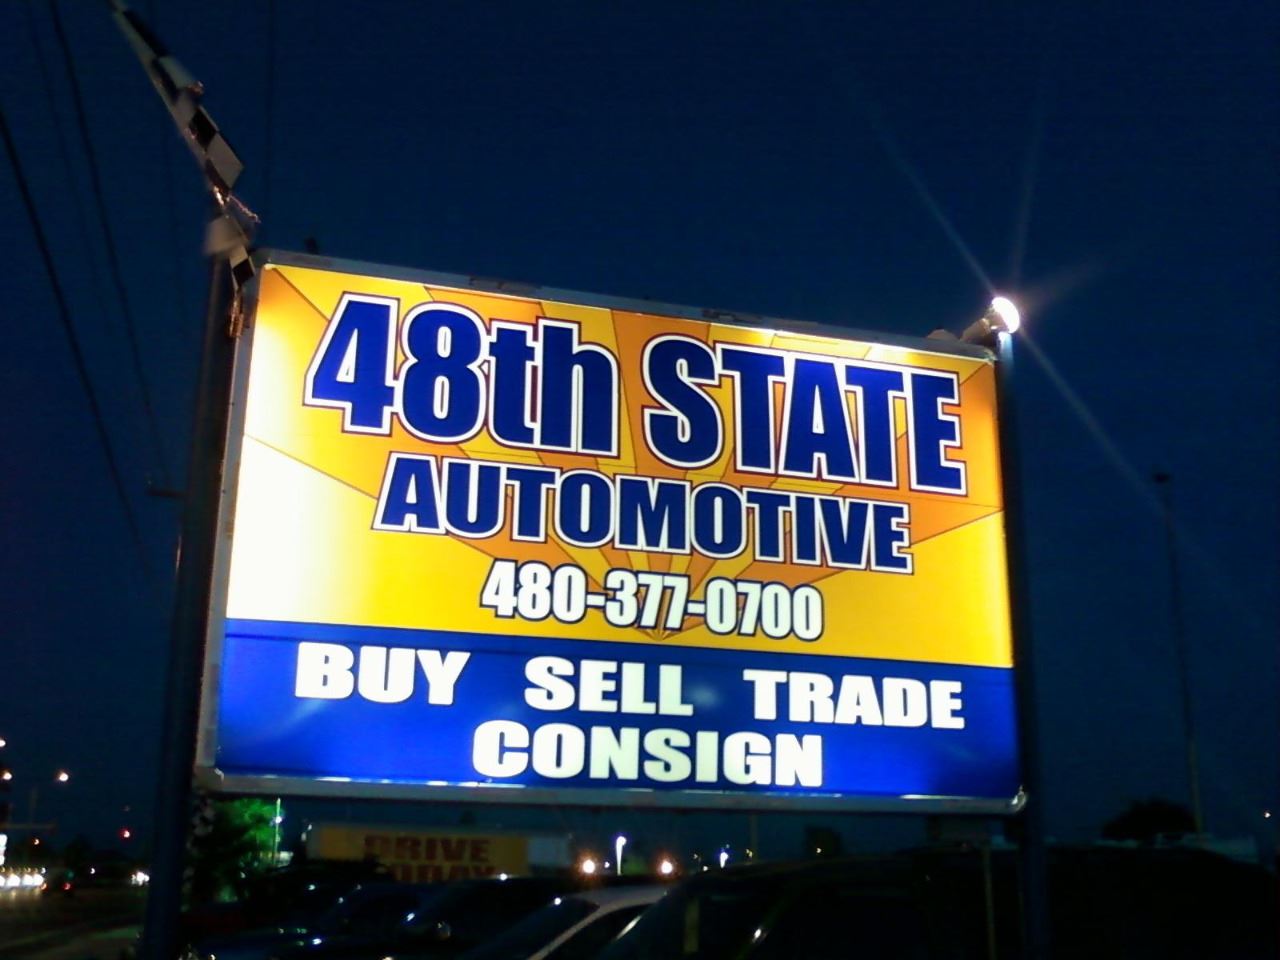 48TH STATE AUTOMOTIVE